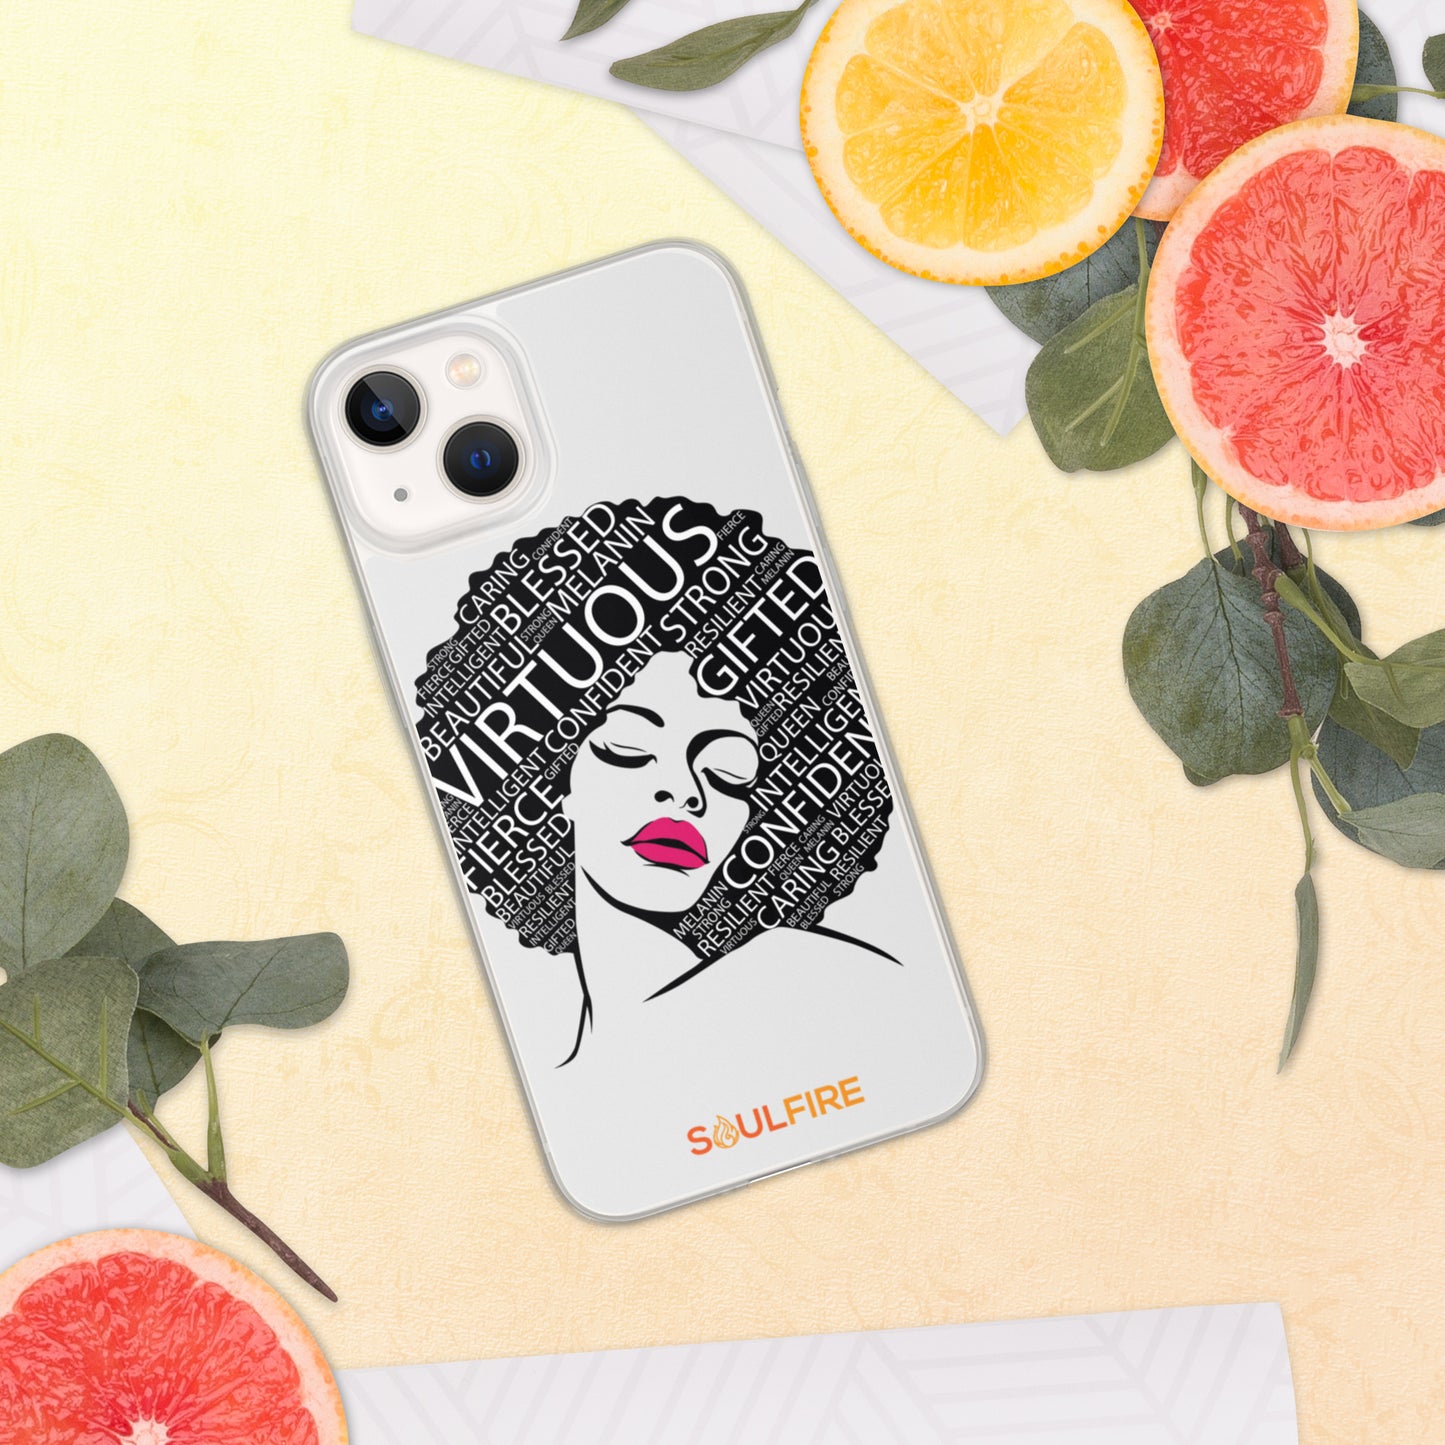 Woman Of Virtue iPhone Case